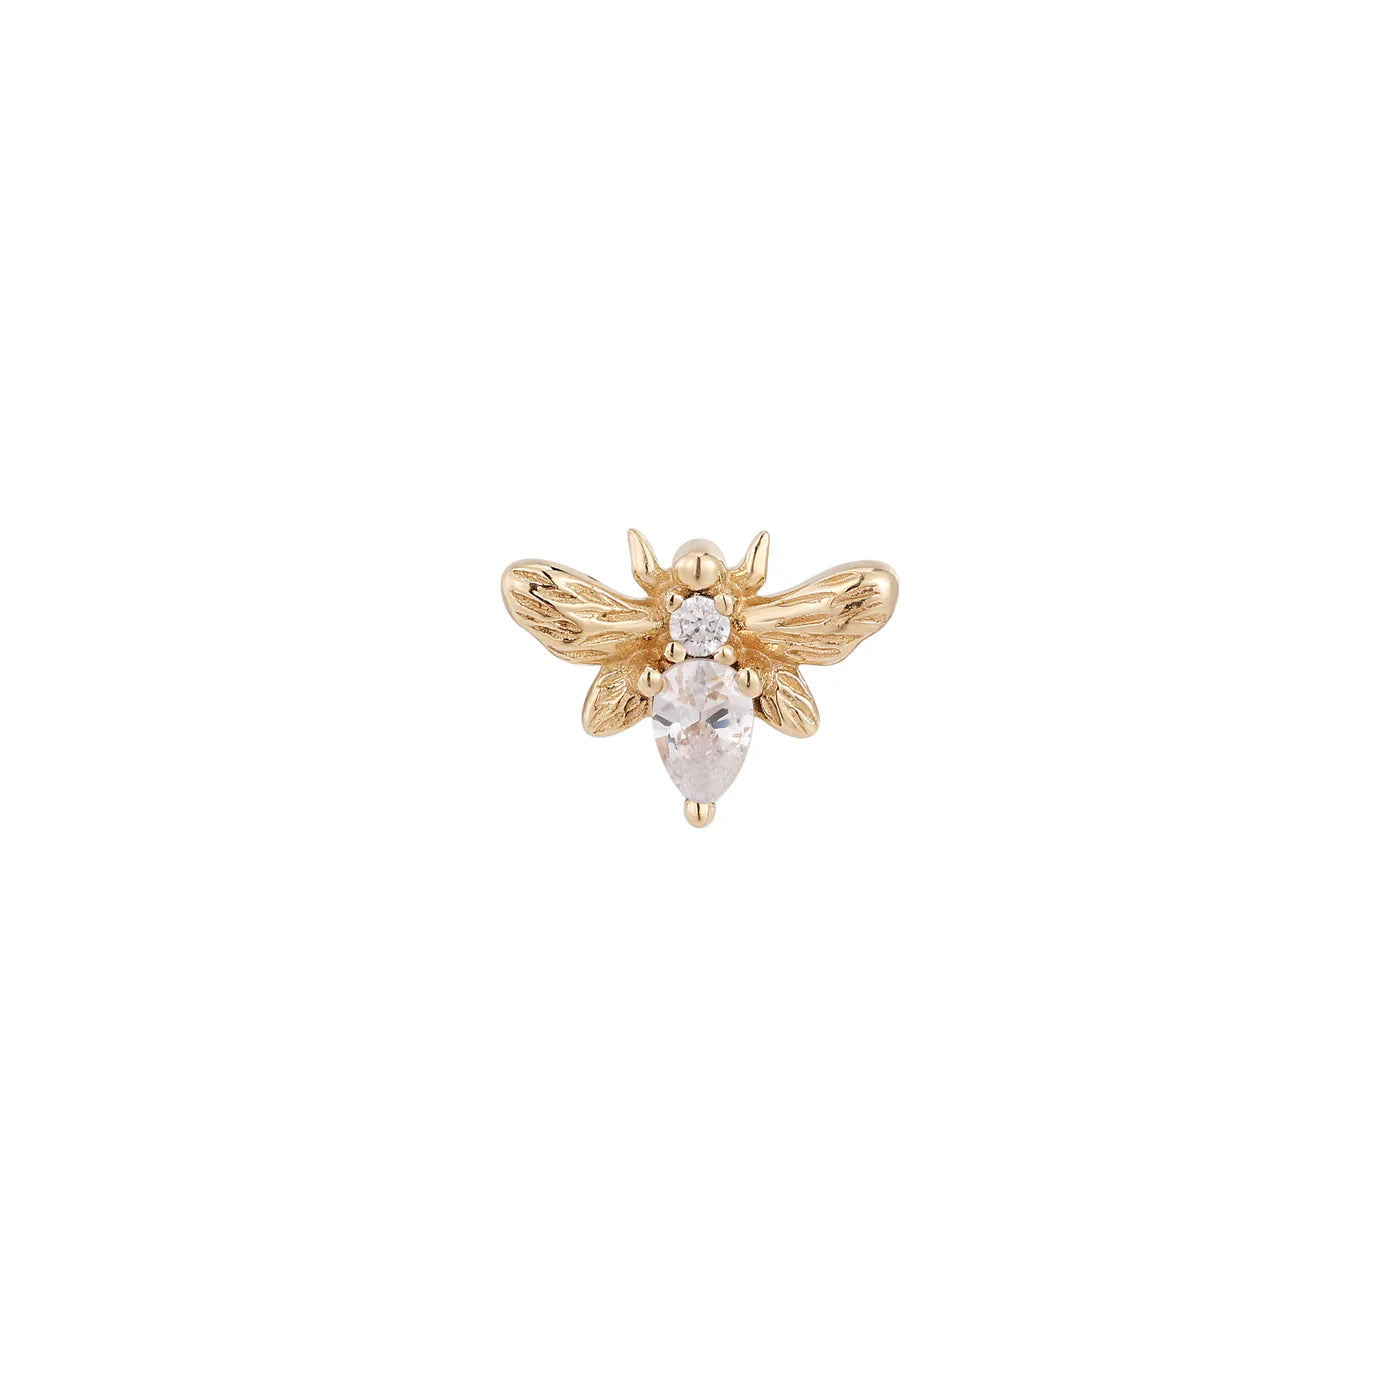 BUDDHA JEWELRY - BEE CHIC - CZ - 14KT SOLID GOLD - THREADLESS END